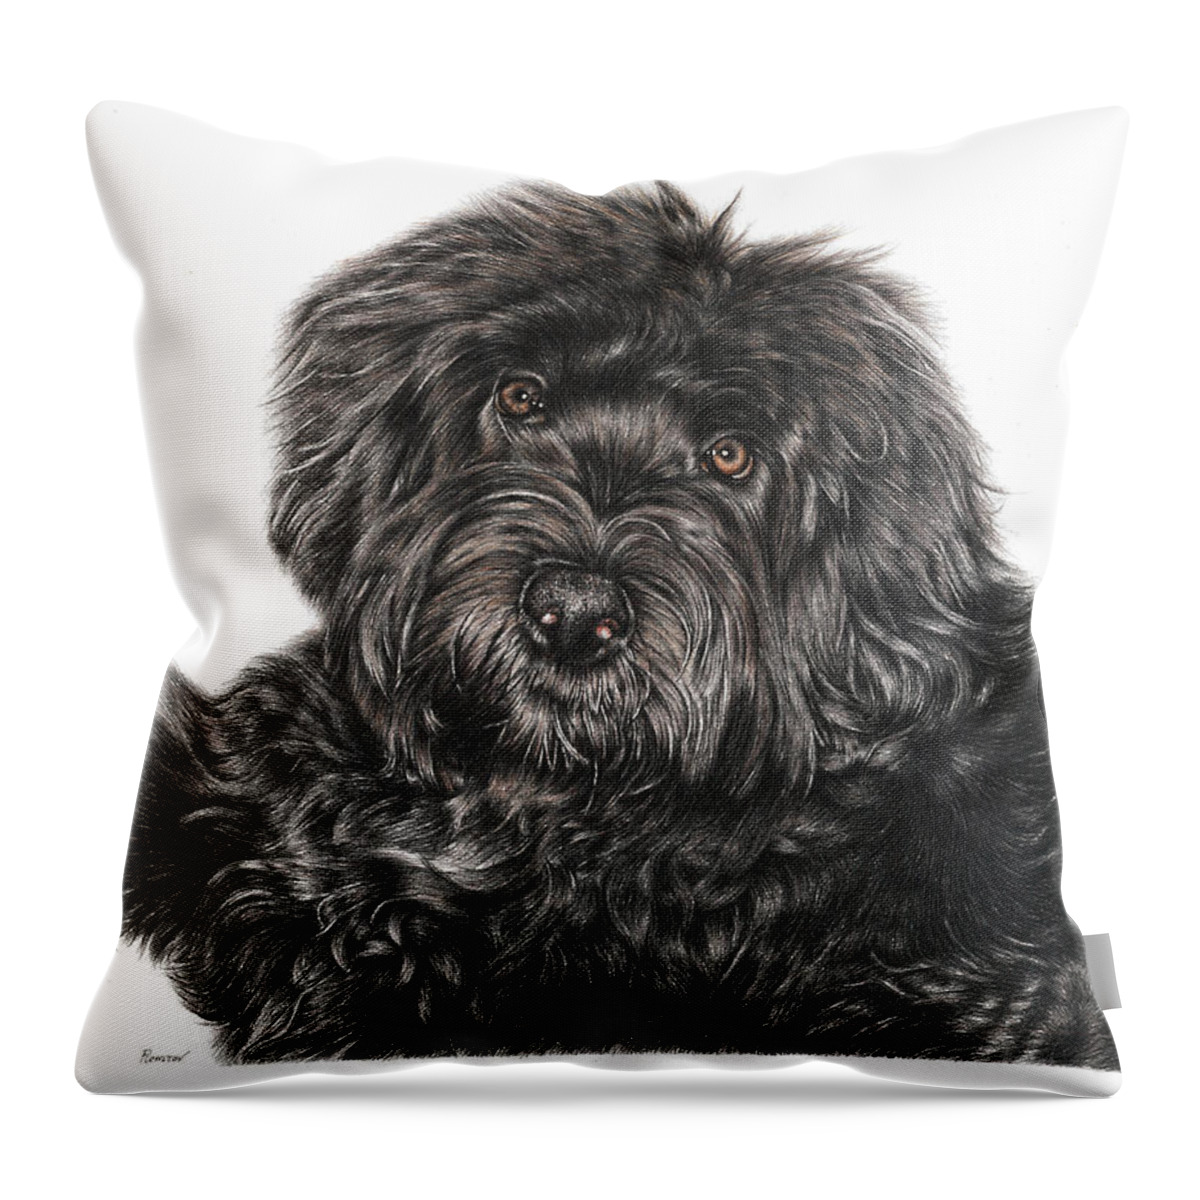 Portuguese Water Dog Throw Pillow featuring the drawing Portuguese Water Dog Toby by Casey 'Remrov' Vormer